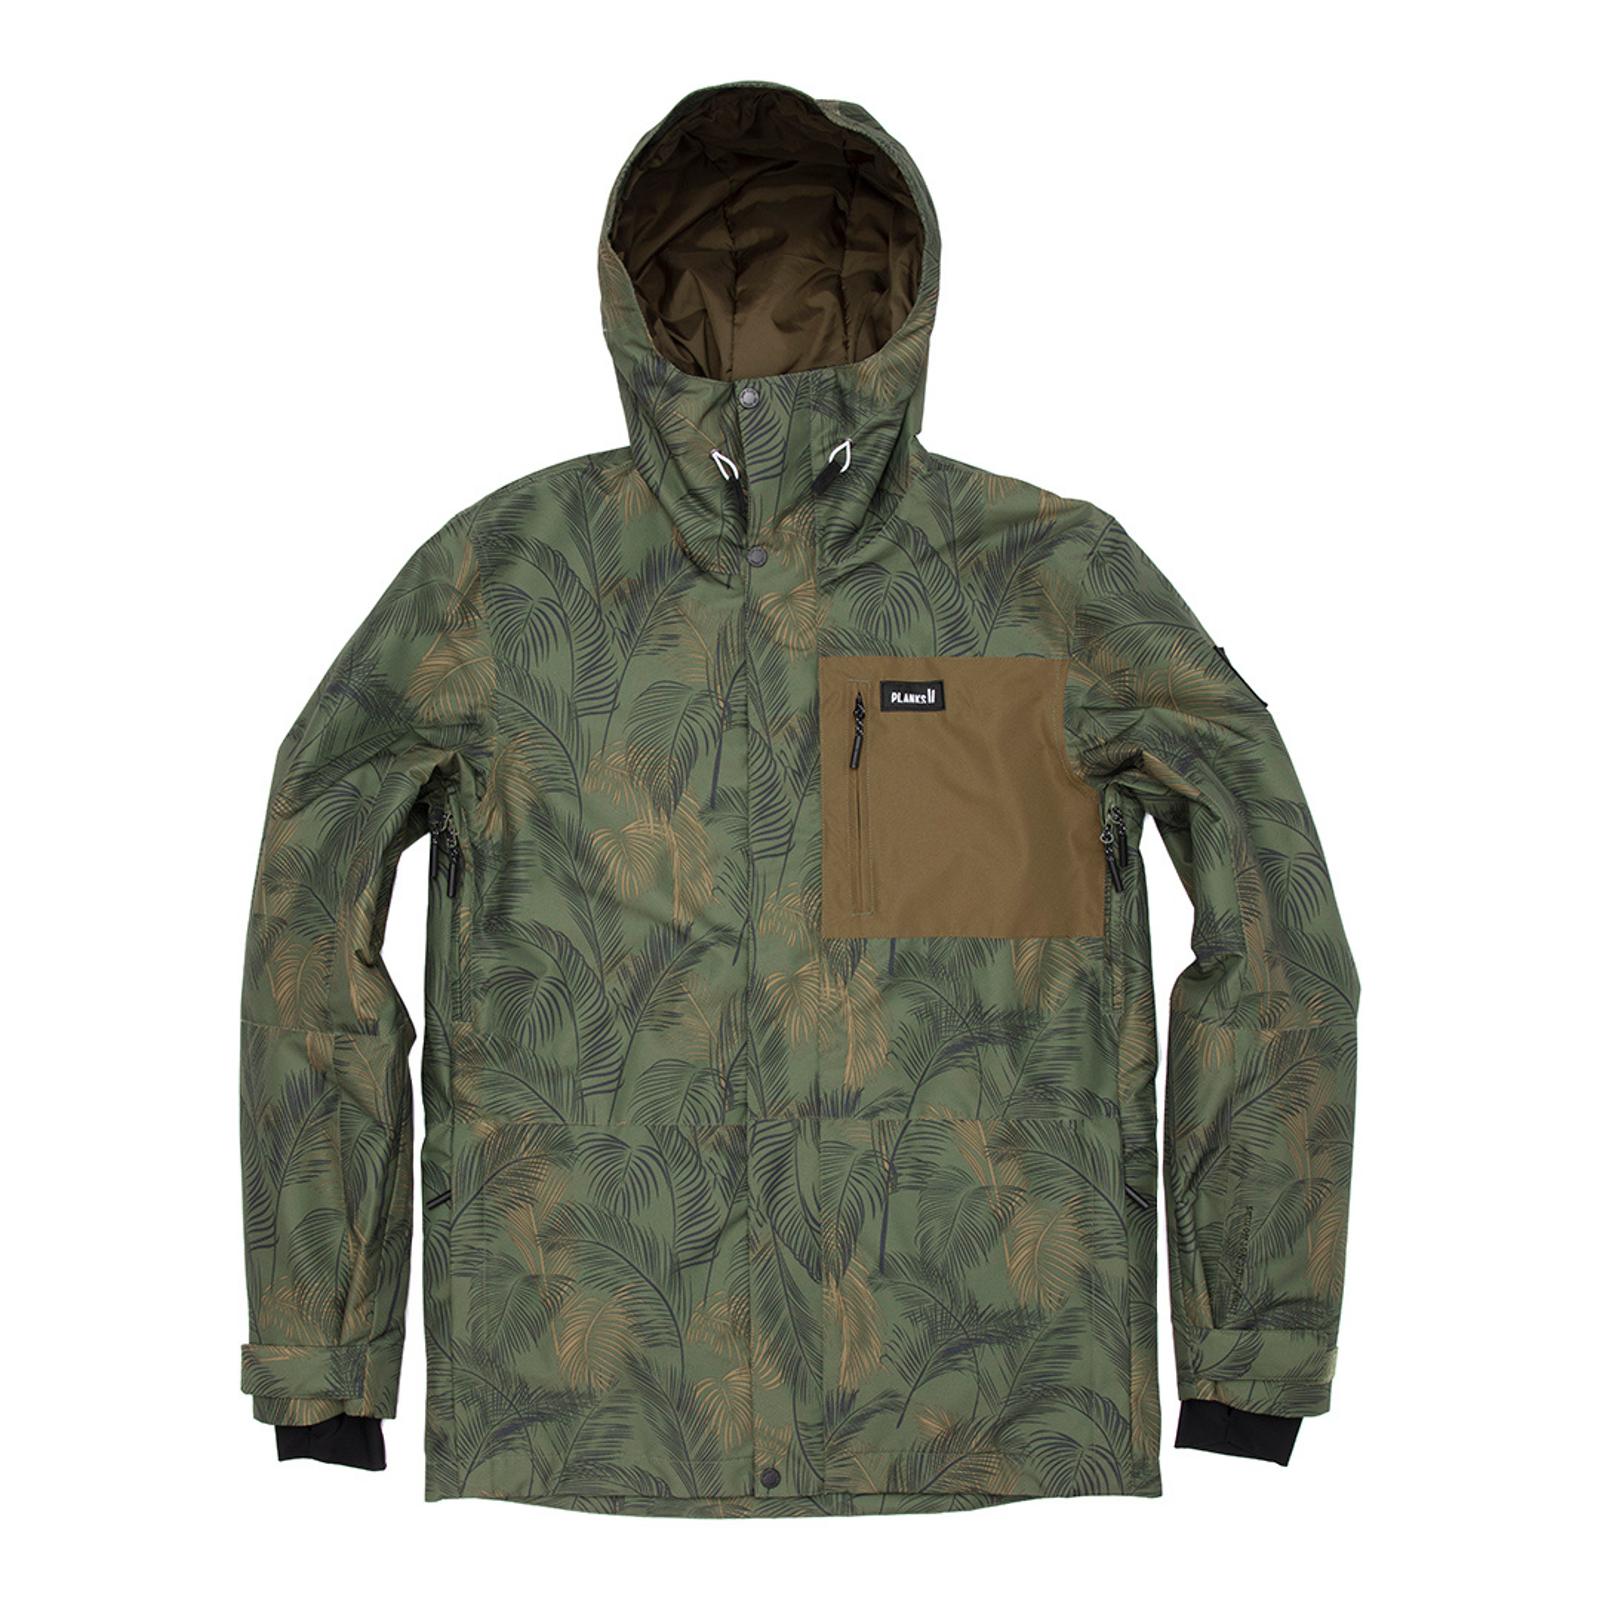 Men's Jungle Palm Feel Good Insulated Jacket - BrandAlley